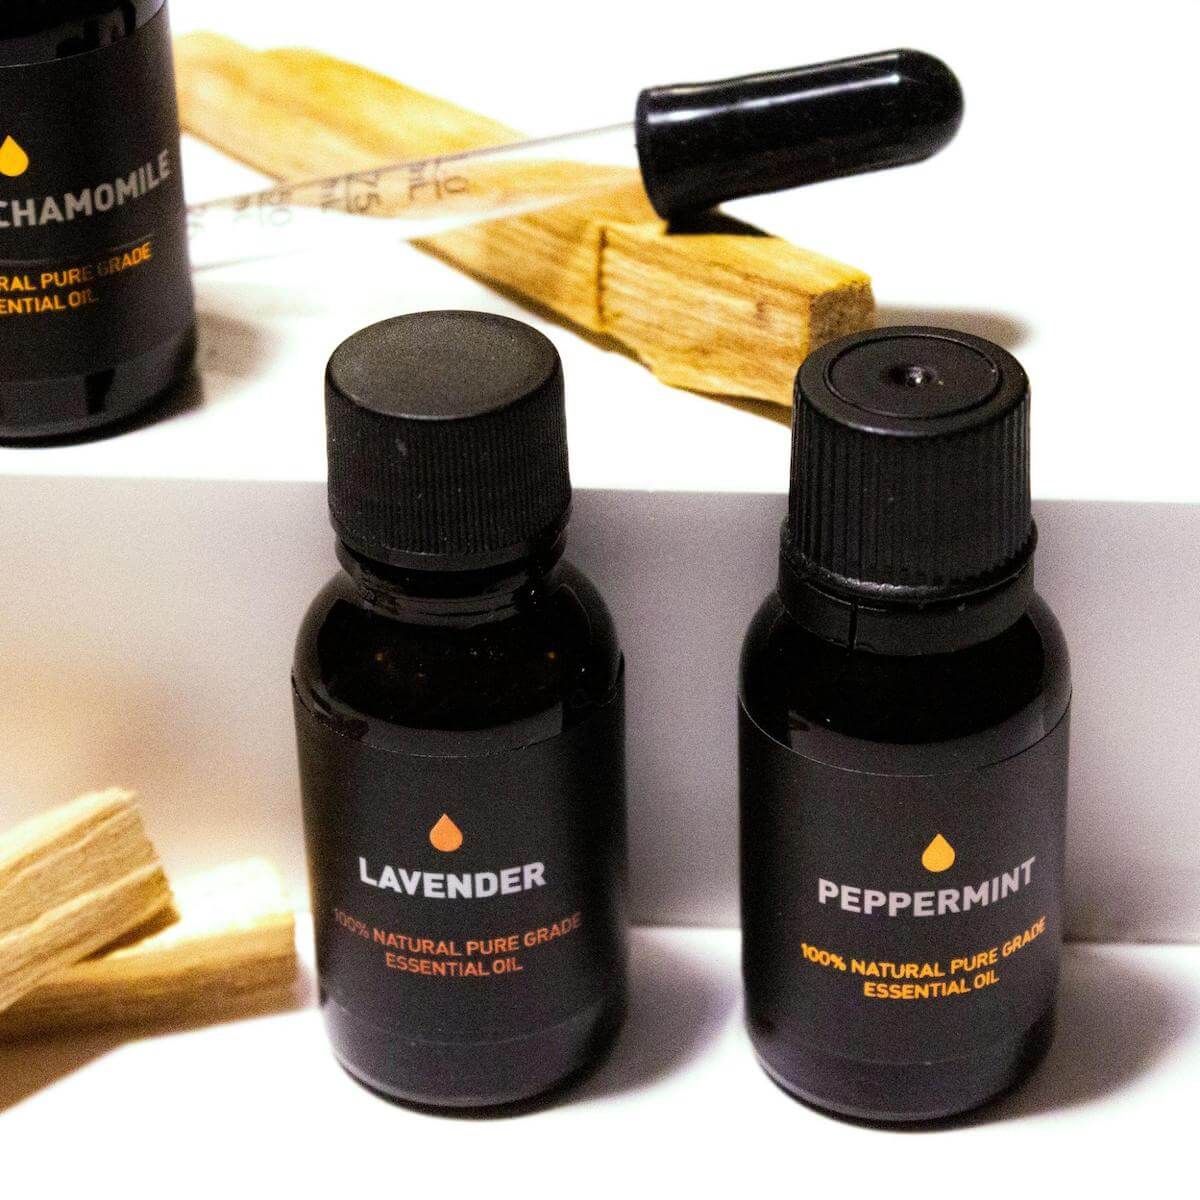 Lavender and peppermint oils